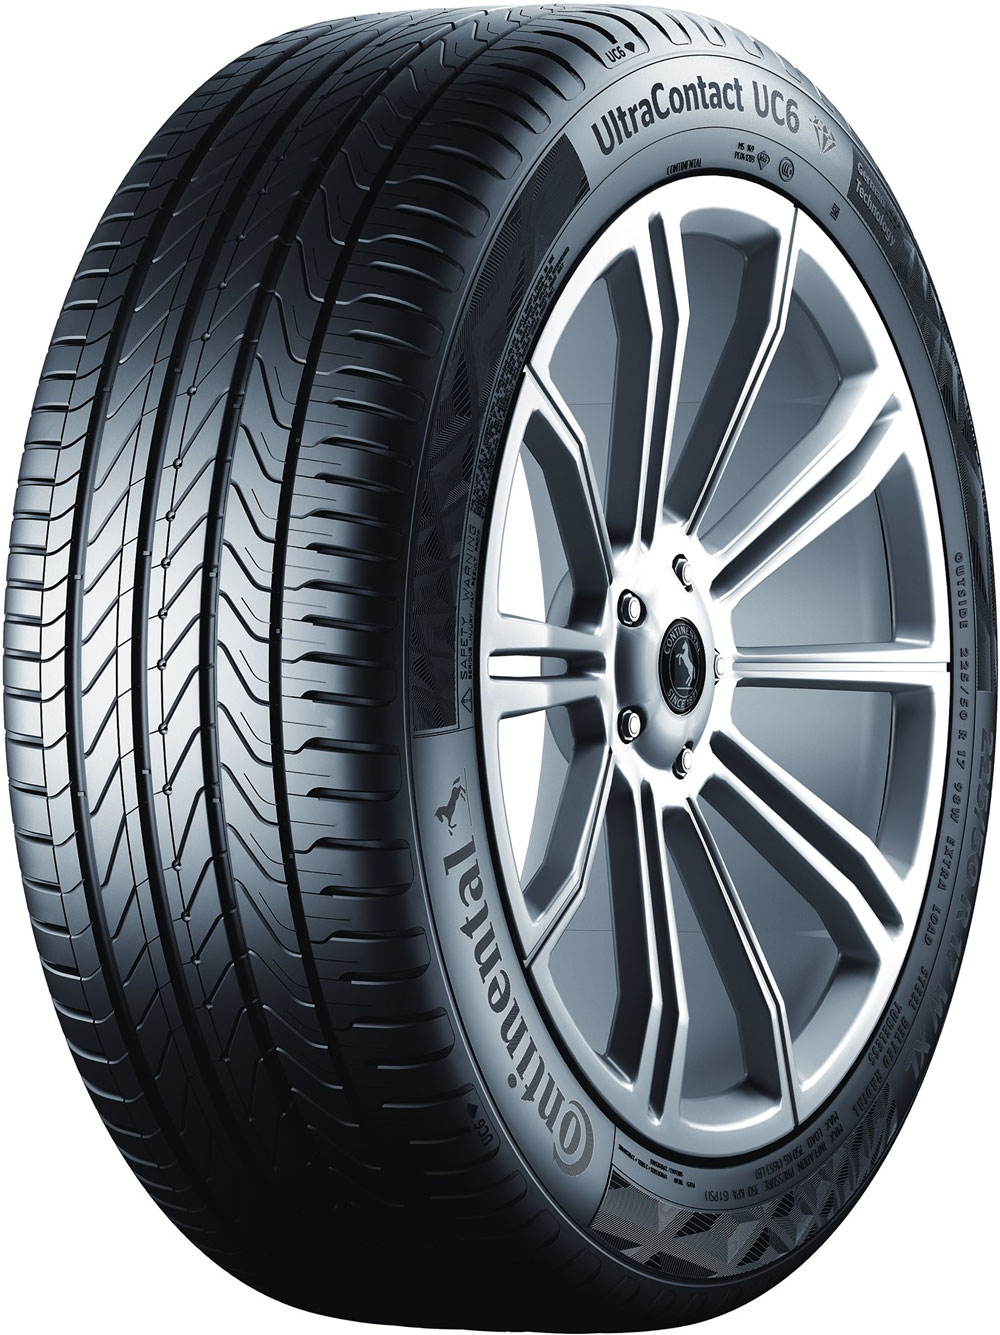 Anvelope auto CONTINENTAL UCXLFR XL 215/50 R17 95W